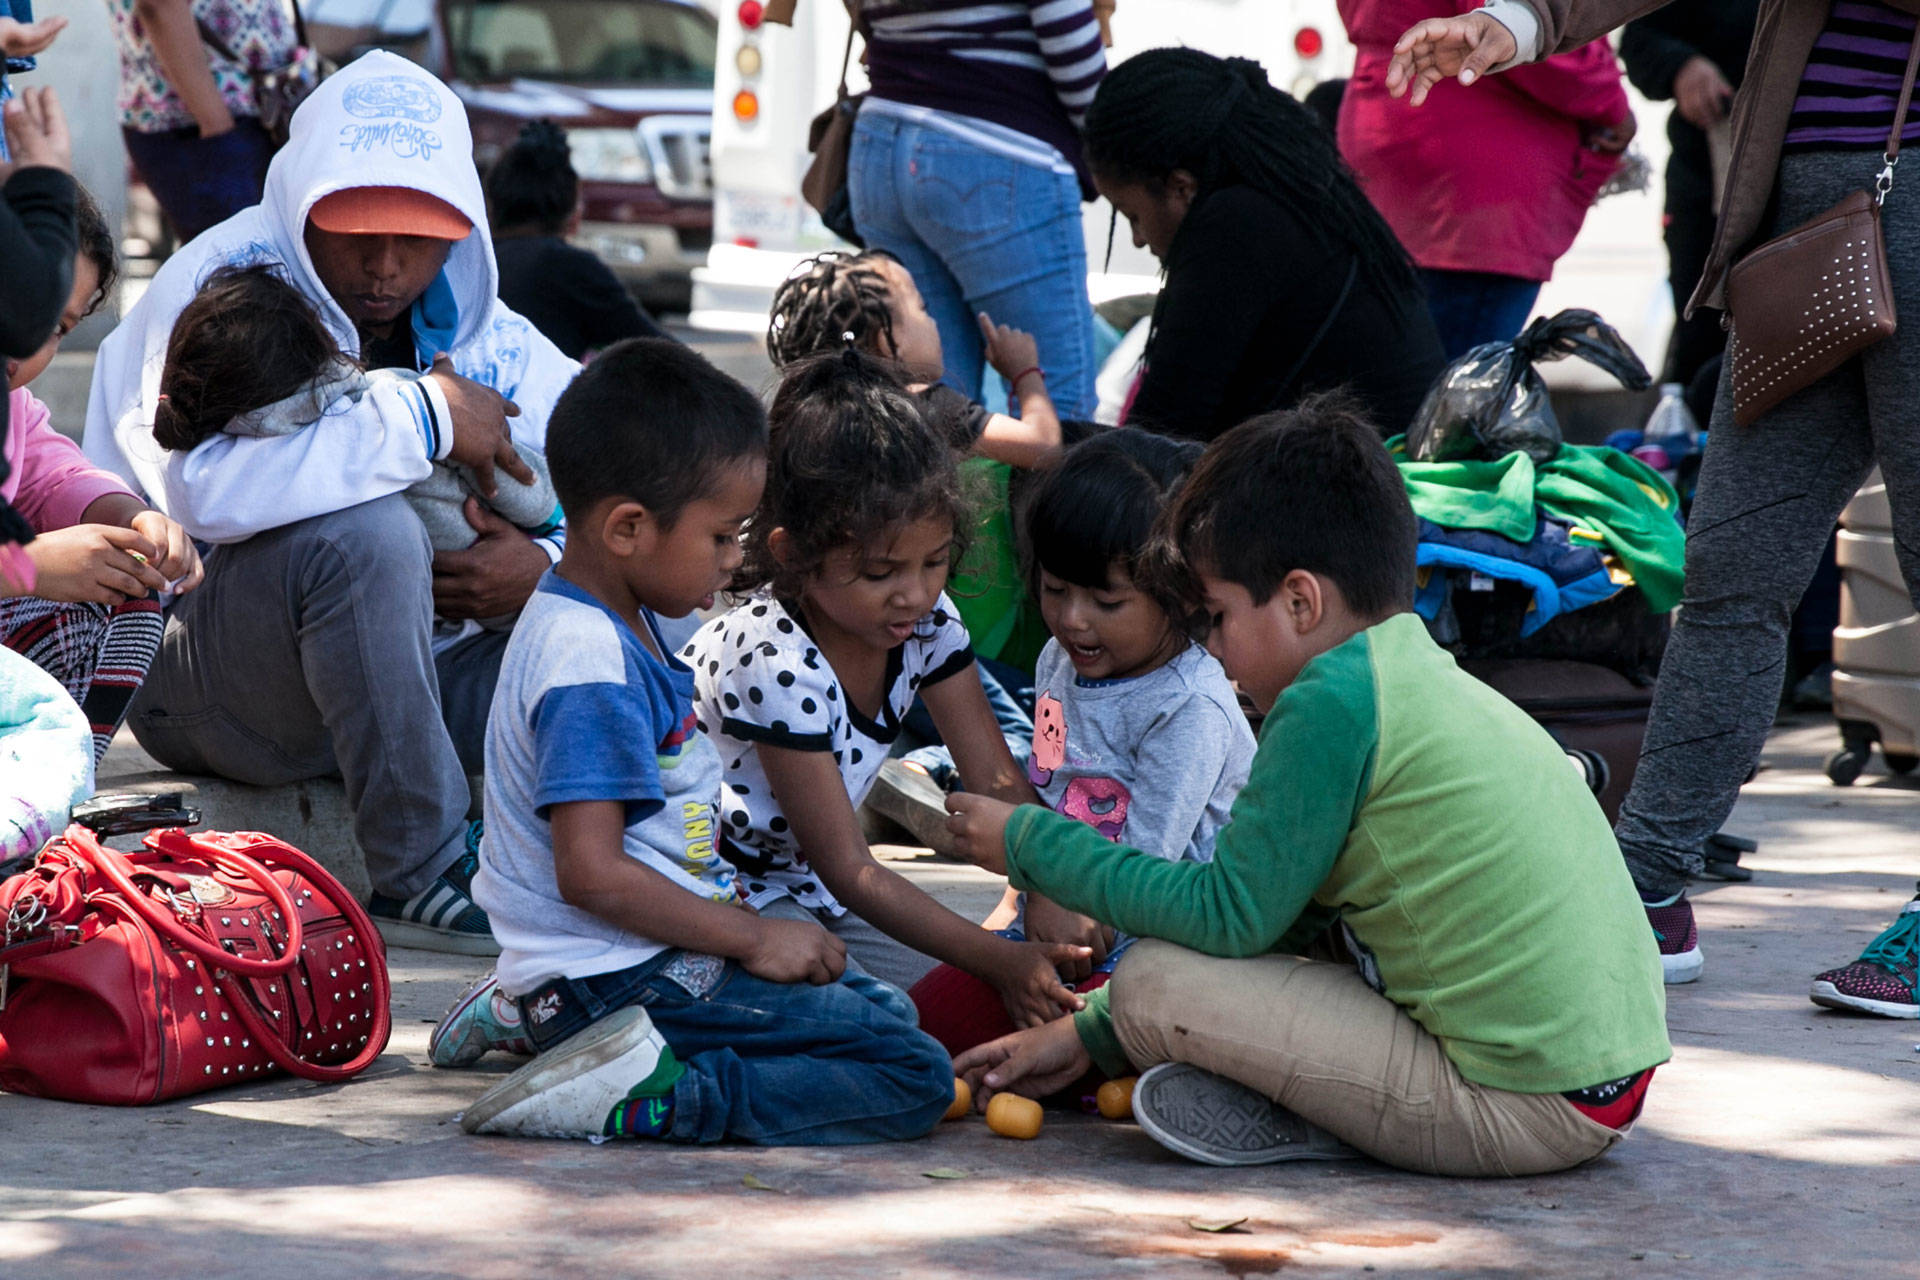 Children play as their parents wait on the Mexican side of the border, in the hopes of entering the U.S. legally by applying for asylum. The families waiting underwent arduous journeys from multiple continents, many spending their life savings to get here. Ariana Dreshler/KQED